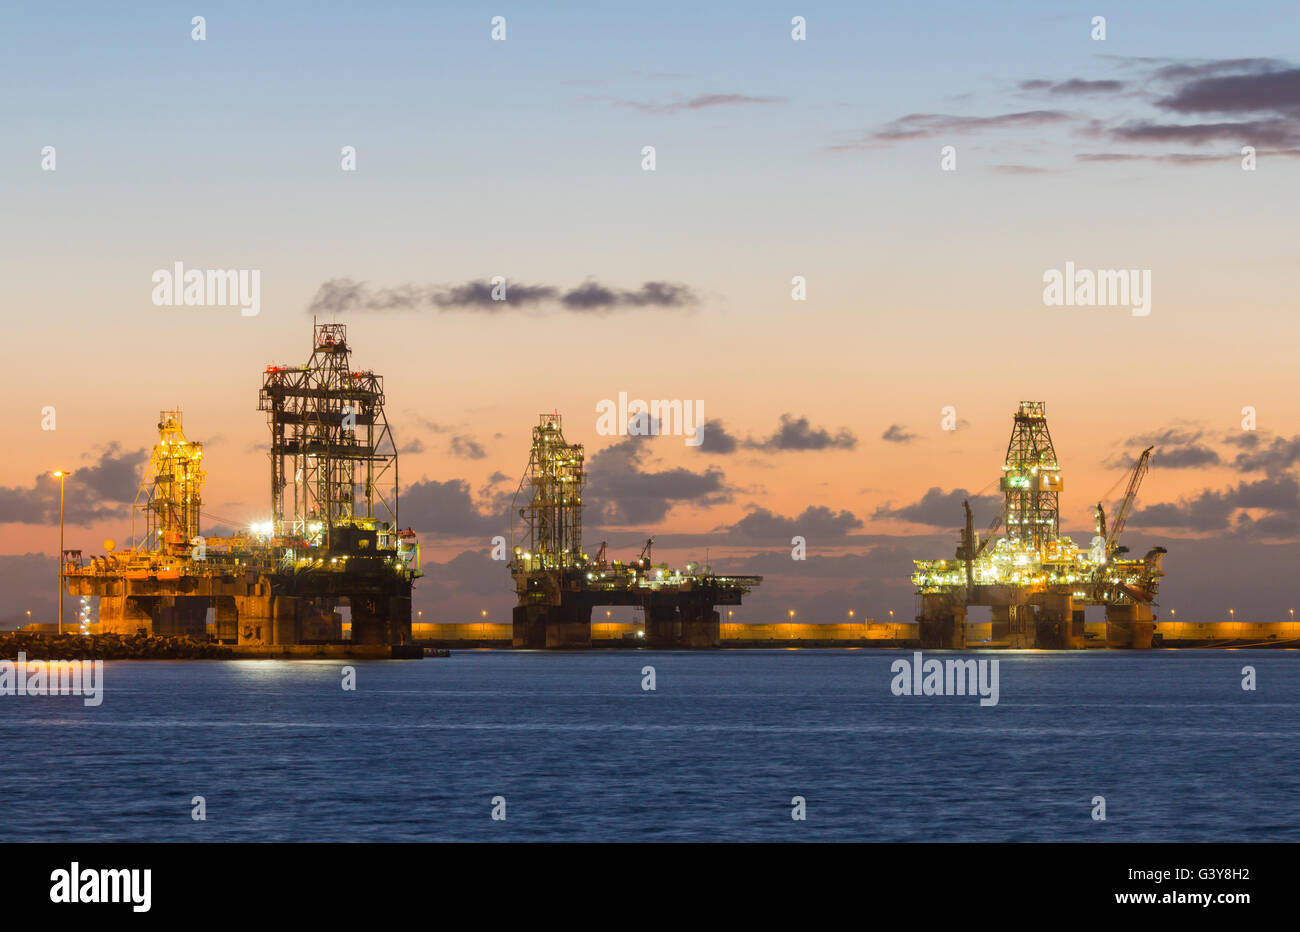 Las Palmas, Gran Canaria, Canary Islands, Spain. 17th June, 2016. Weather: Oil rigs in pre dawn light on a glorious Friday morning in Las palmas, the capital of Gran Canaria. Las Palmas port is used by a number of oil companies for repairs, resupplying, and in the the case of some, for mothballing rigs for long periods due to the fall in oil prices and over supply of crude oil. Credit:  Alan Dawson News/Alamy Live News Stock Photo